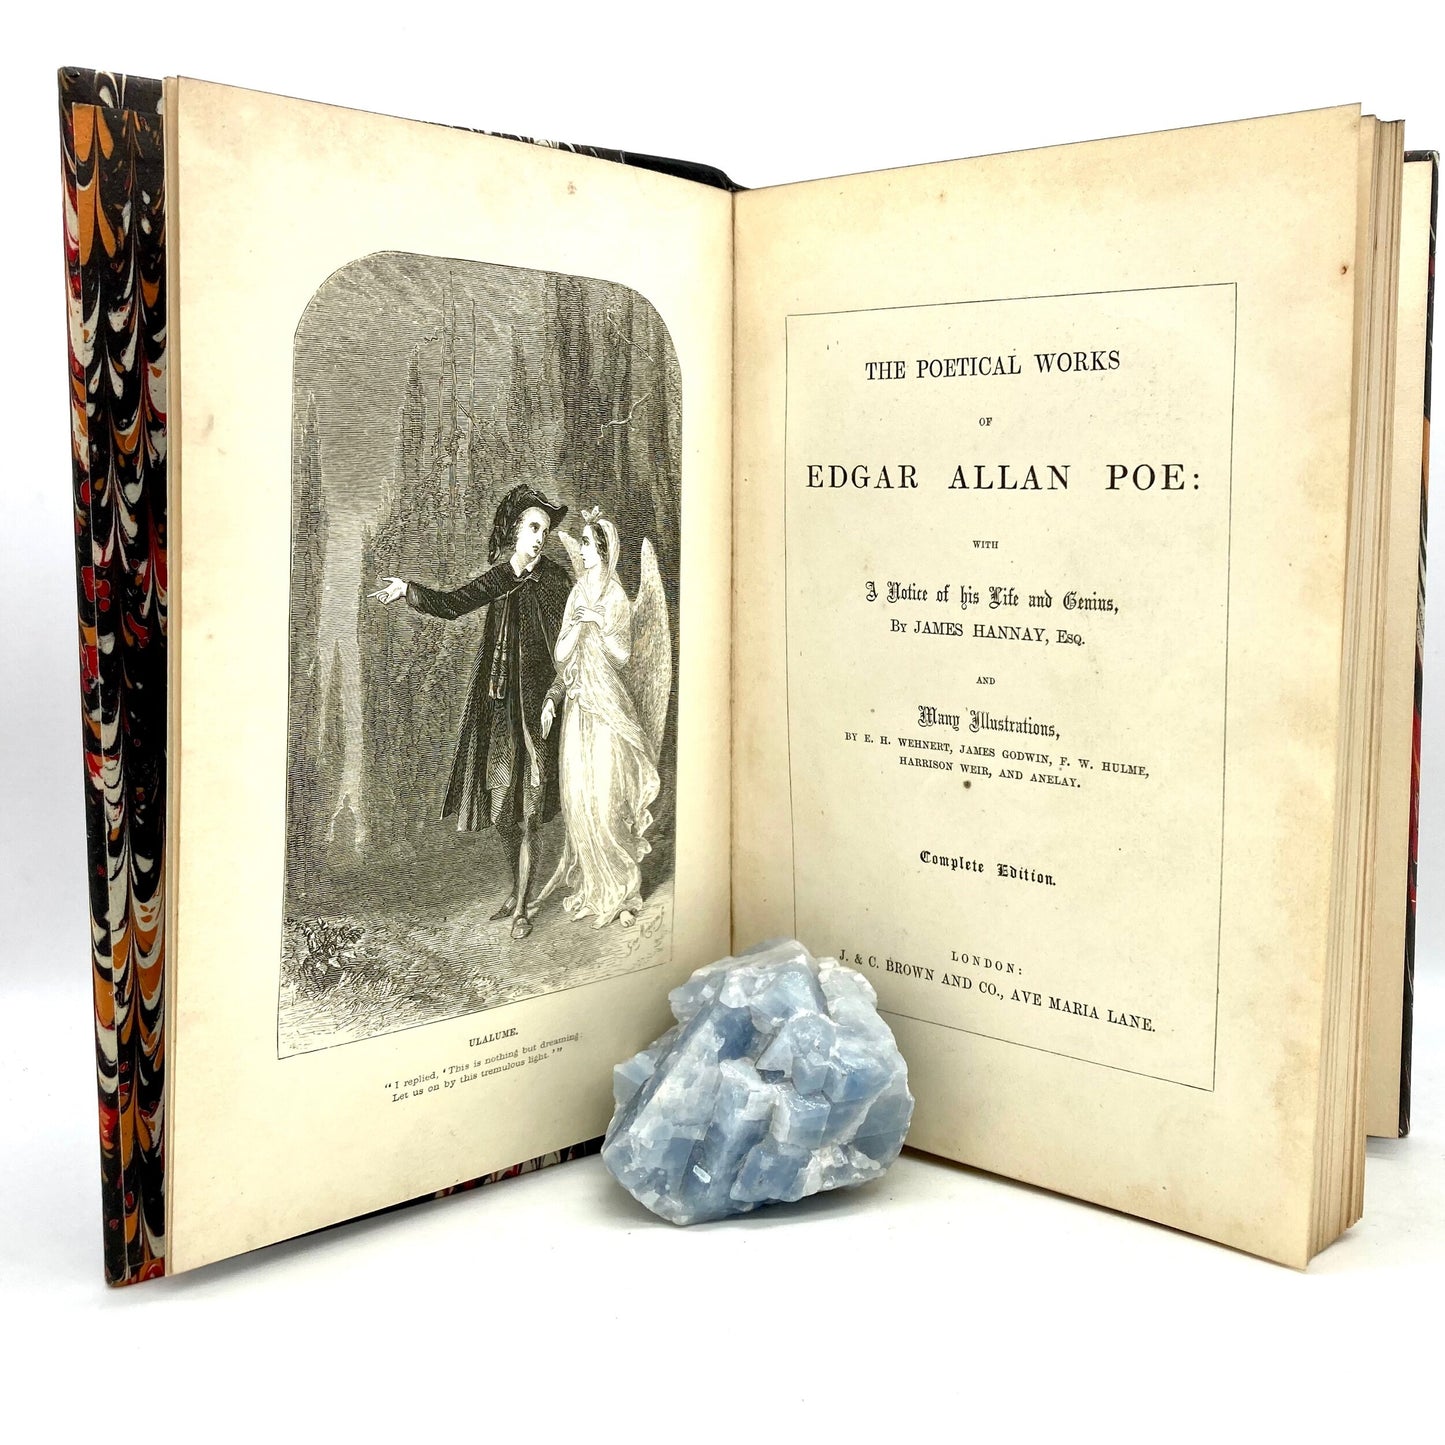 POE, Edgar Allan "The Poetical Works of Edgar Allan Poe" [J. & C. Brown and Co, c1852-60] - Buzz Bookstore